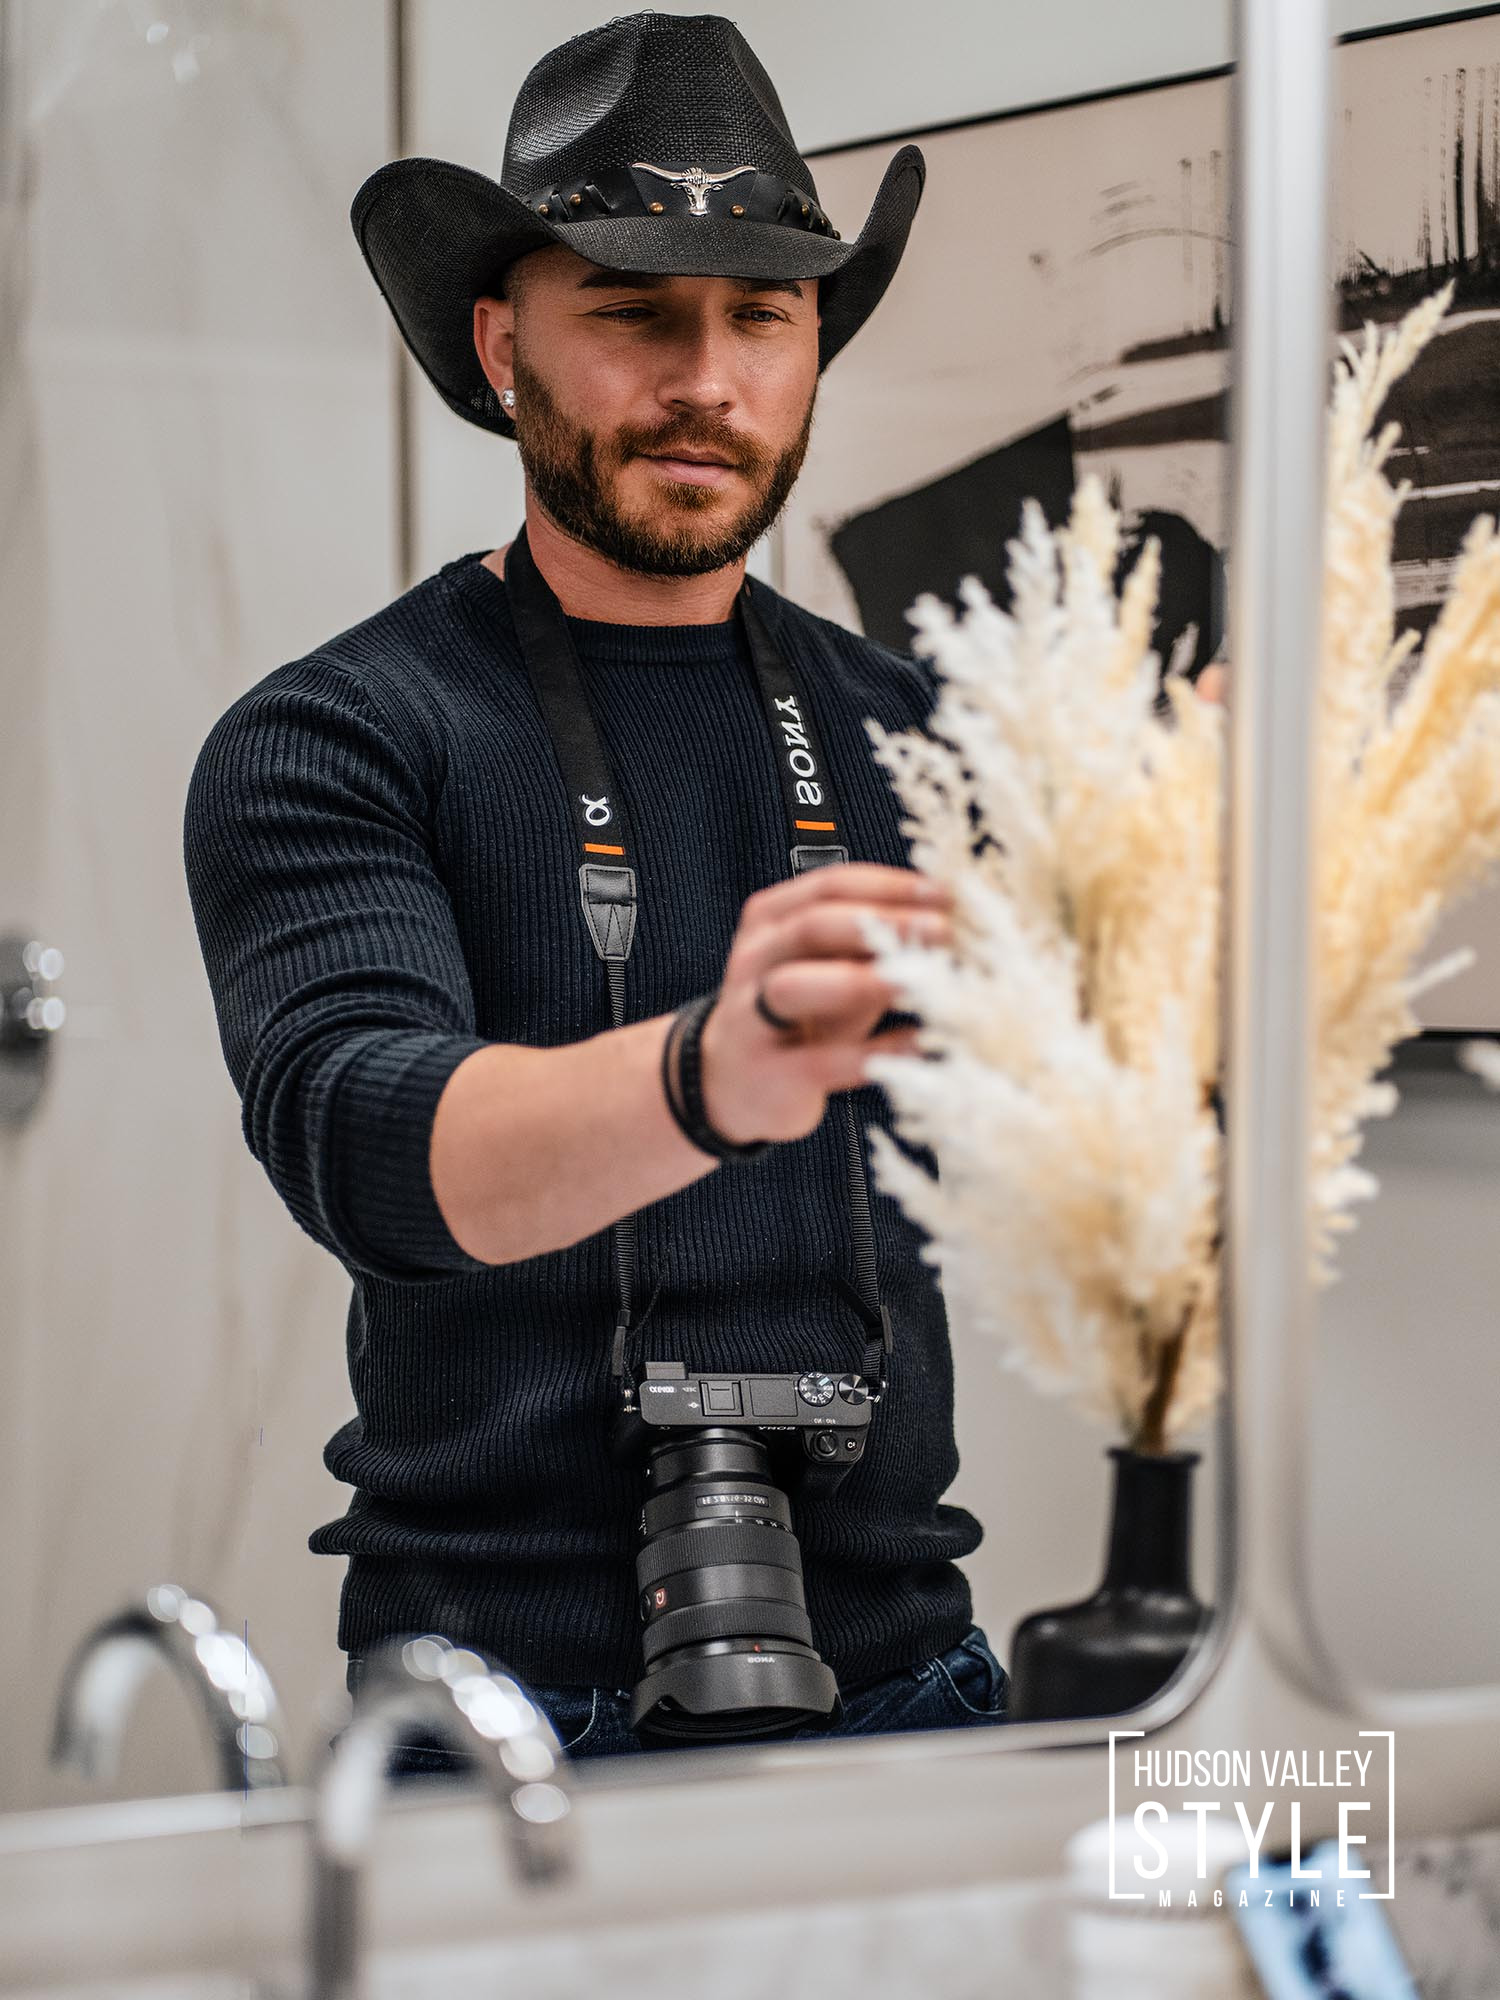 Experiential Travel and Hospitality Photography Trends: A Look at Alluvion Media and Photographer Maxwell Alexander – Presented by Alluvion Media